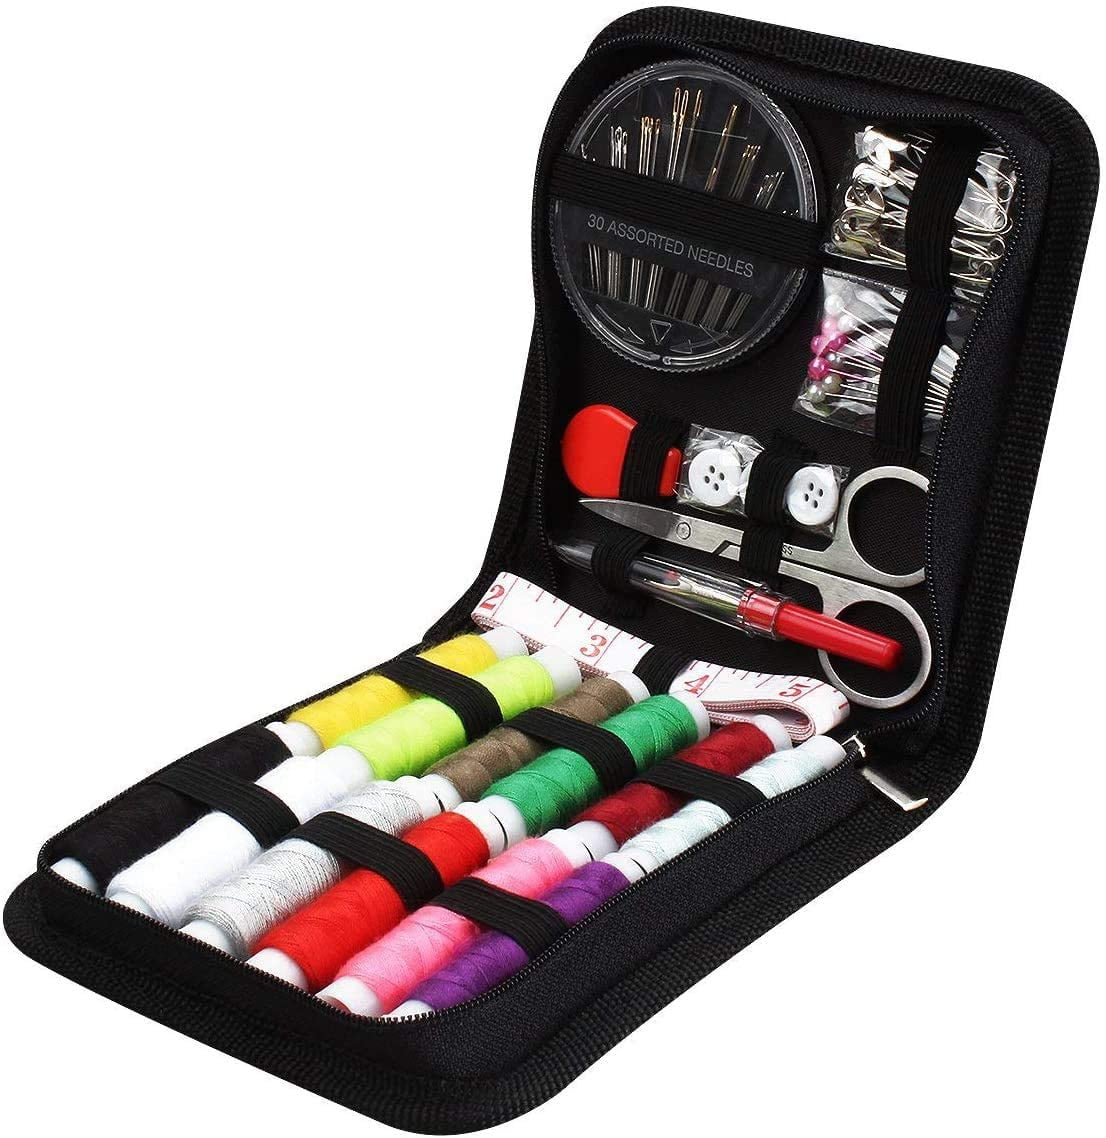 Practical Travel Sewing Kit with Scissor Tape Measure Thimble Needle Storage Box 